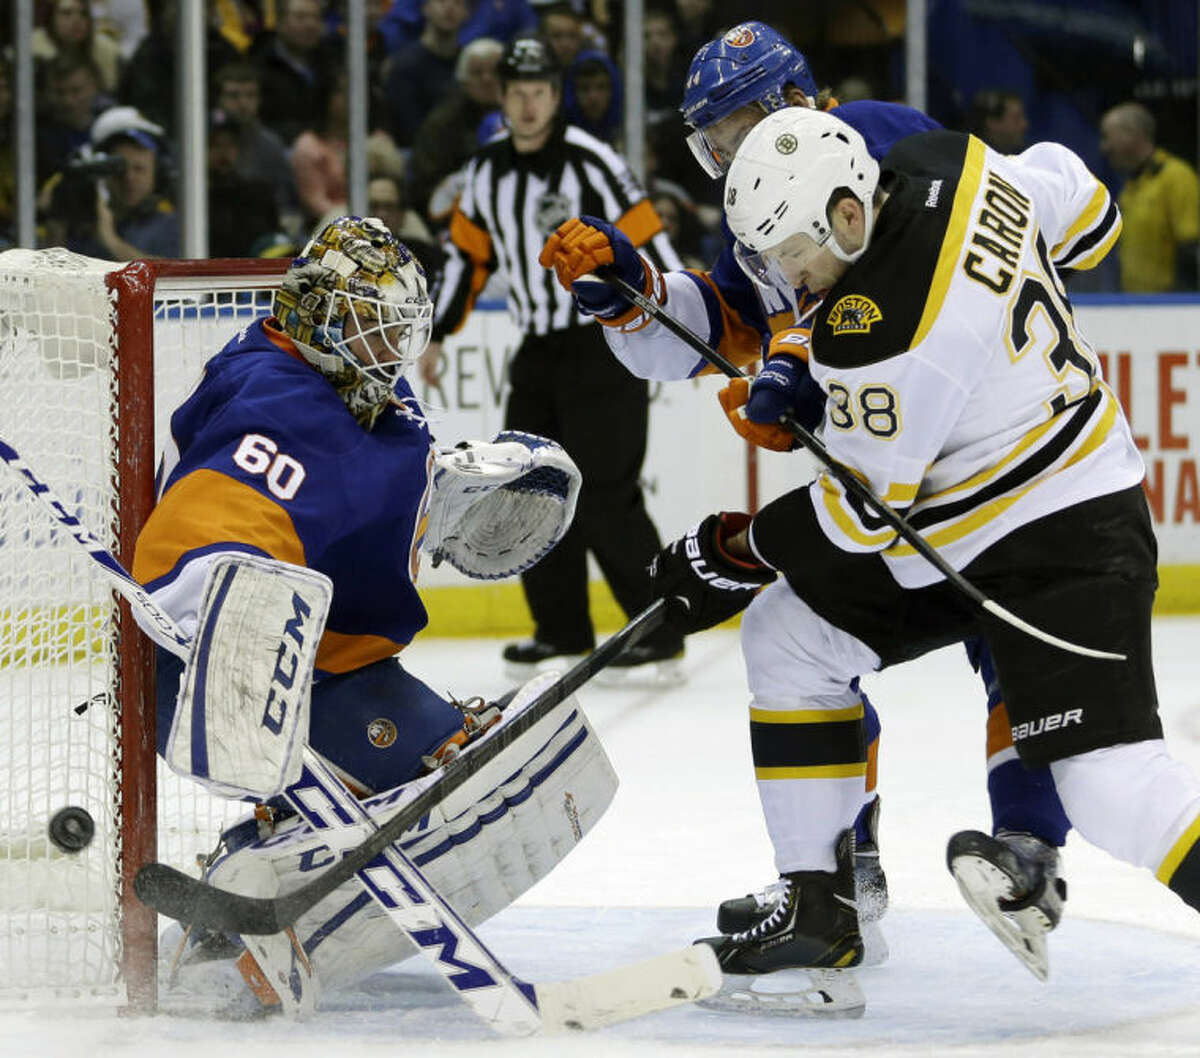 Boston Bruins' Jordan Caron, right, and New York Islanders' Calvin de Haan scuffle for the puck in front of goalie Kevin Poulin, left, during the first period of the NHL hockey game, Monday, Jan. 27, 2014, in Uniondale, New York. (AP Photo/Seth Wenig)